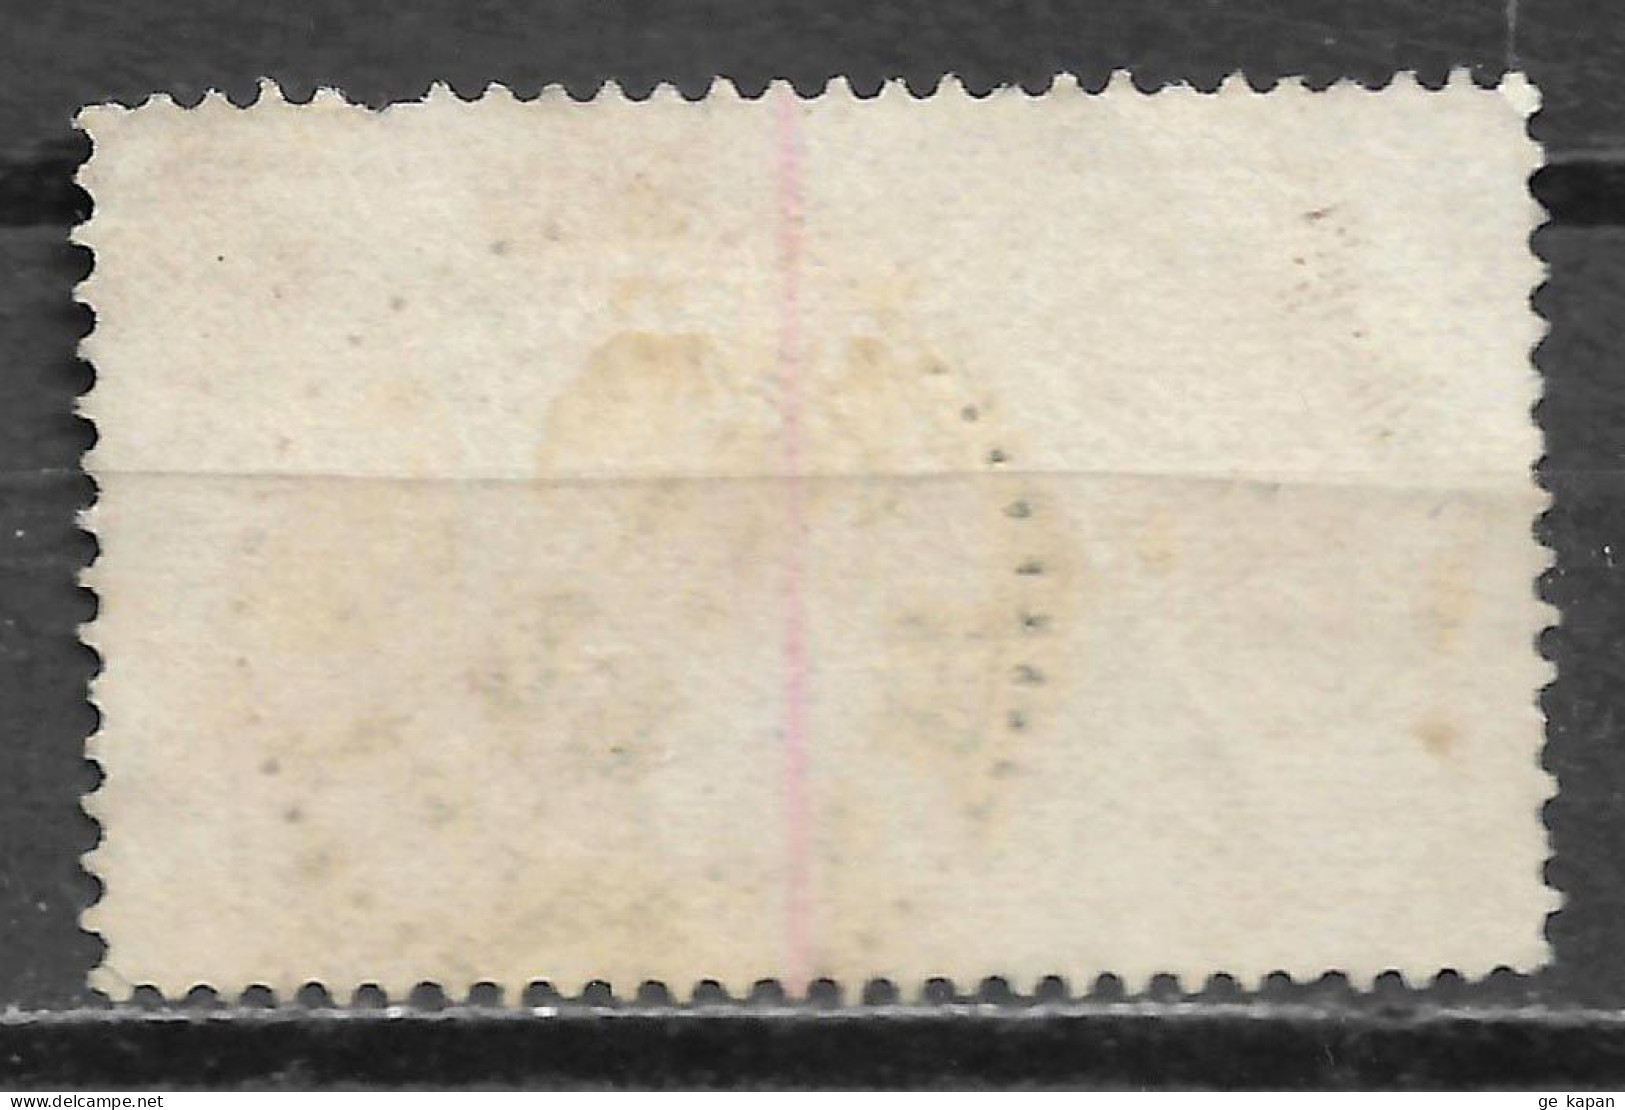 1881 SWEDEN Official USED STAMP Perf.13 (Scott # O21a) CV $22.50 - Service